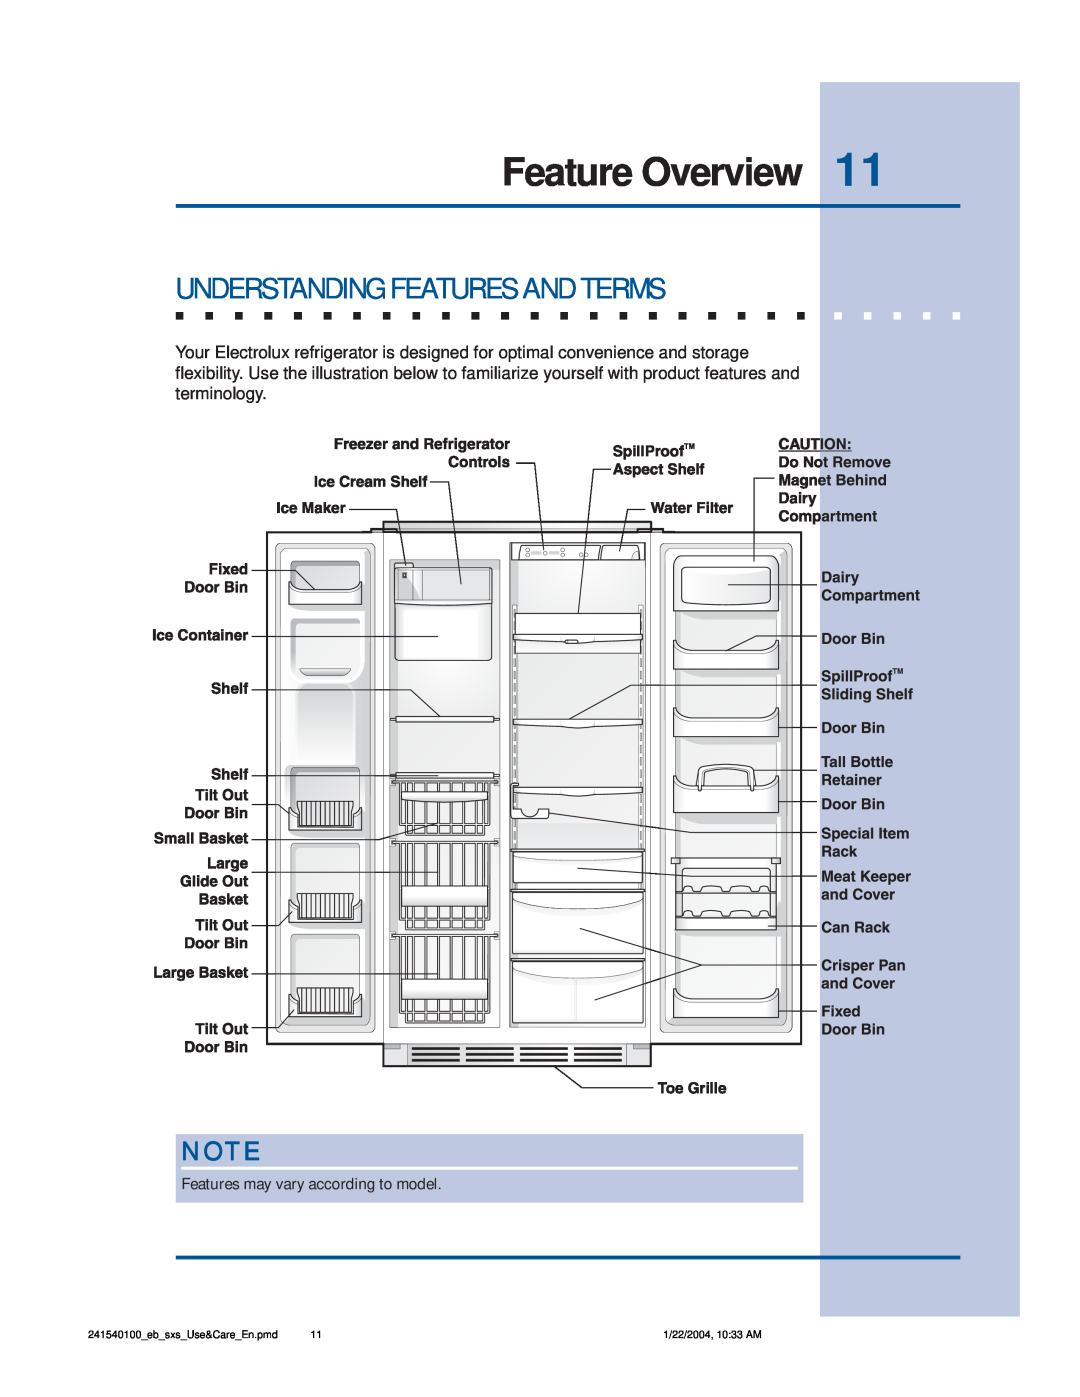 Frigidaire 241540100 (1203) manual Feature Overview, Understanding Features And Terms, Features may vary according to model 